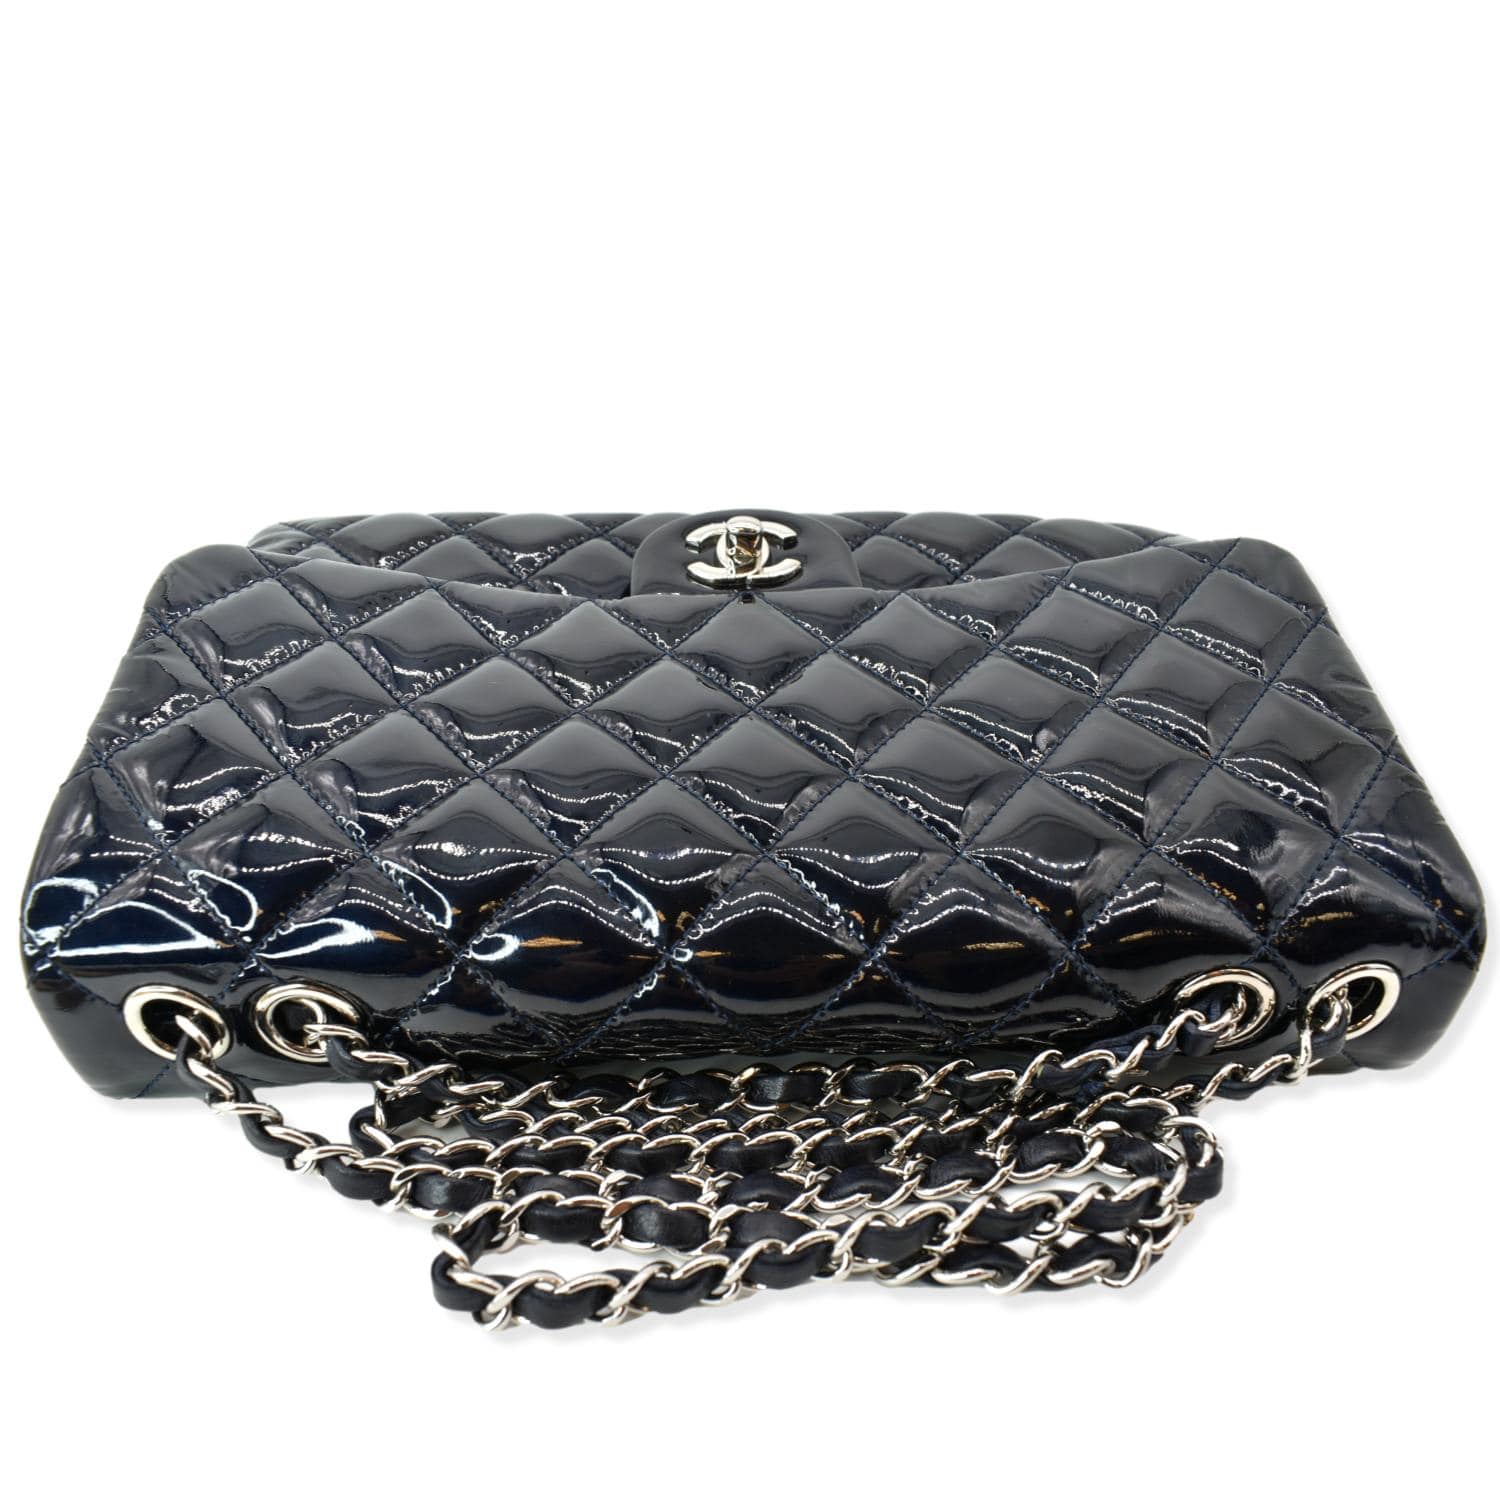 CHANEL Navy Quilted Patent Leather Accordion Flap Bag